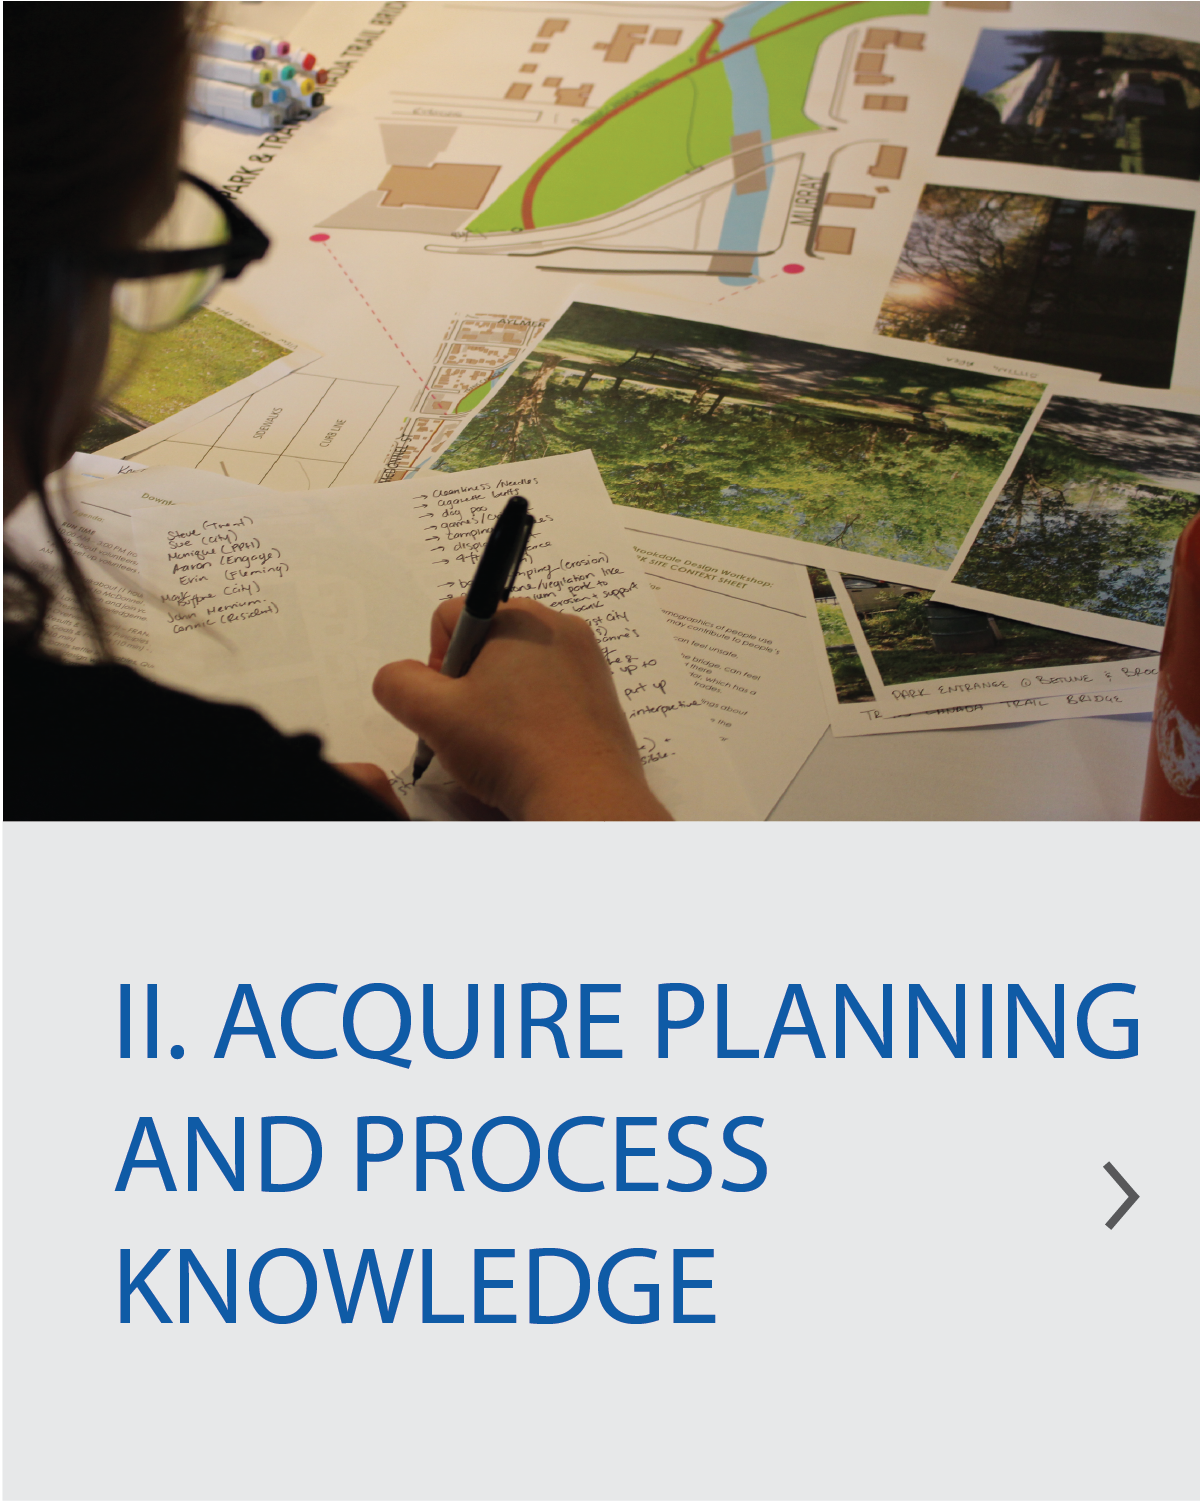 2. Aquire planning and process knowledge